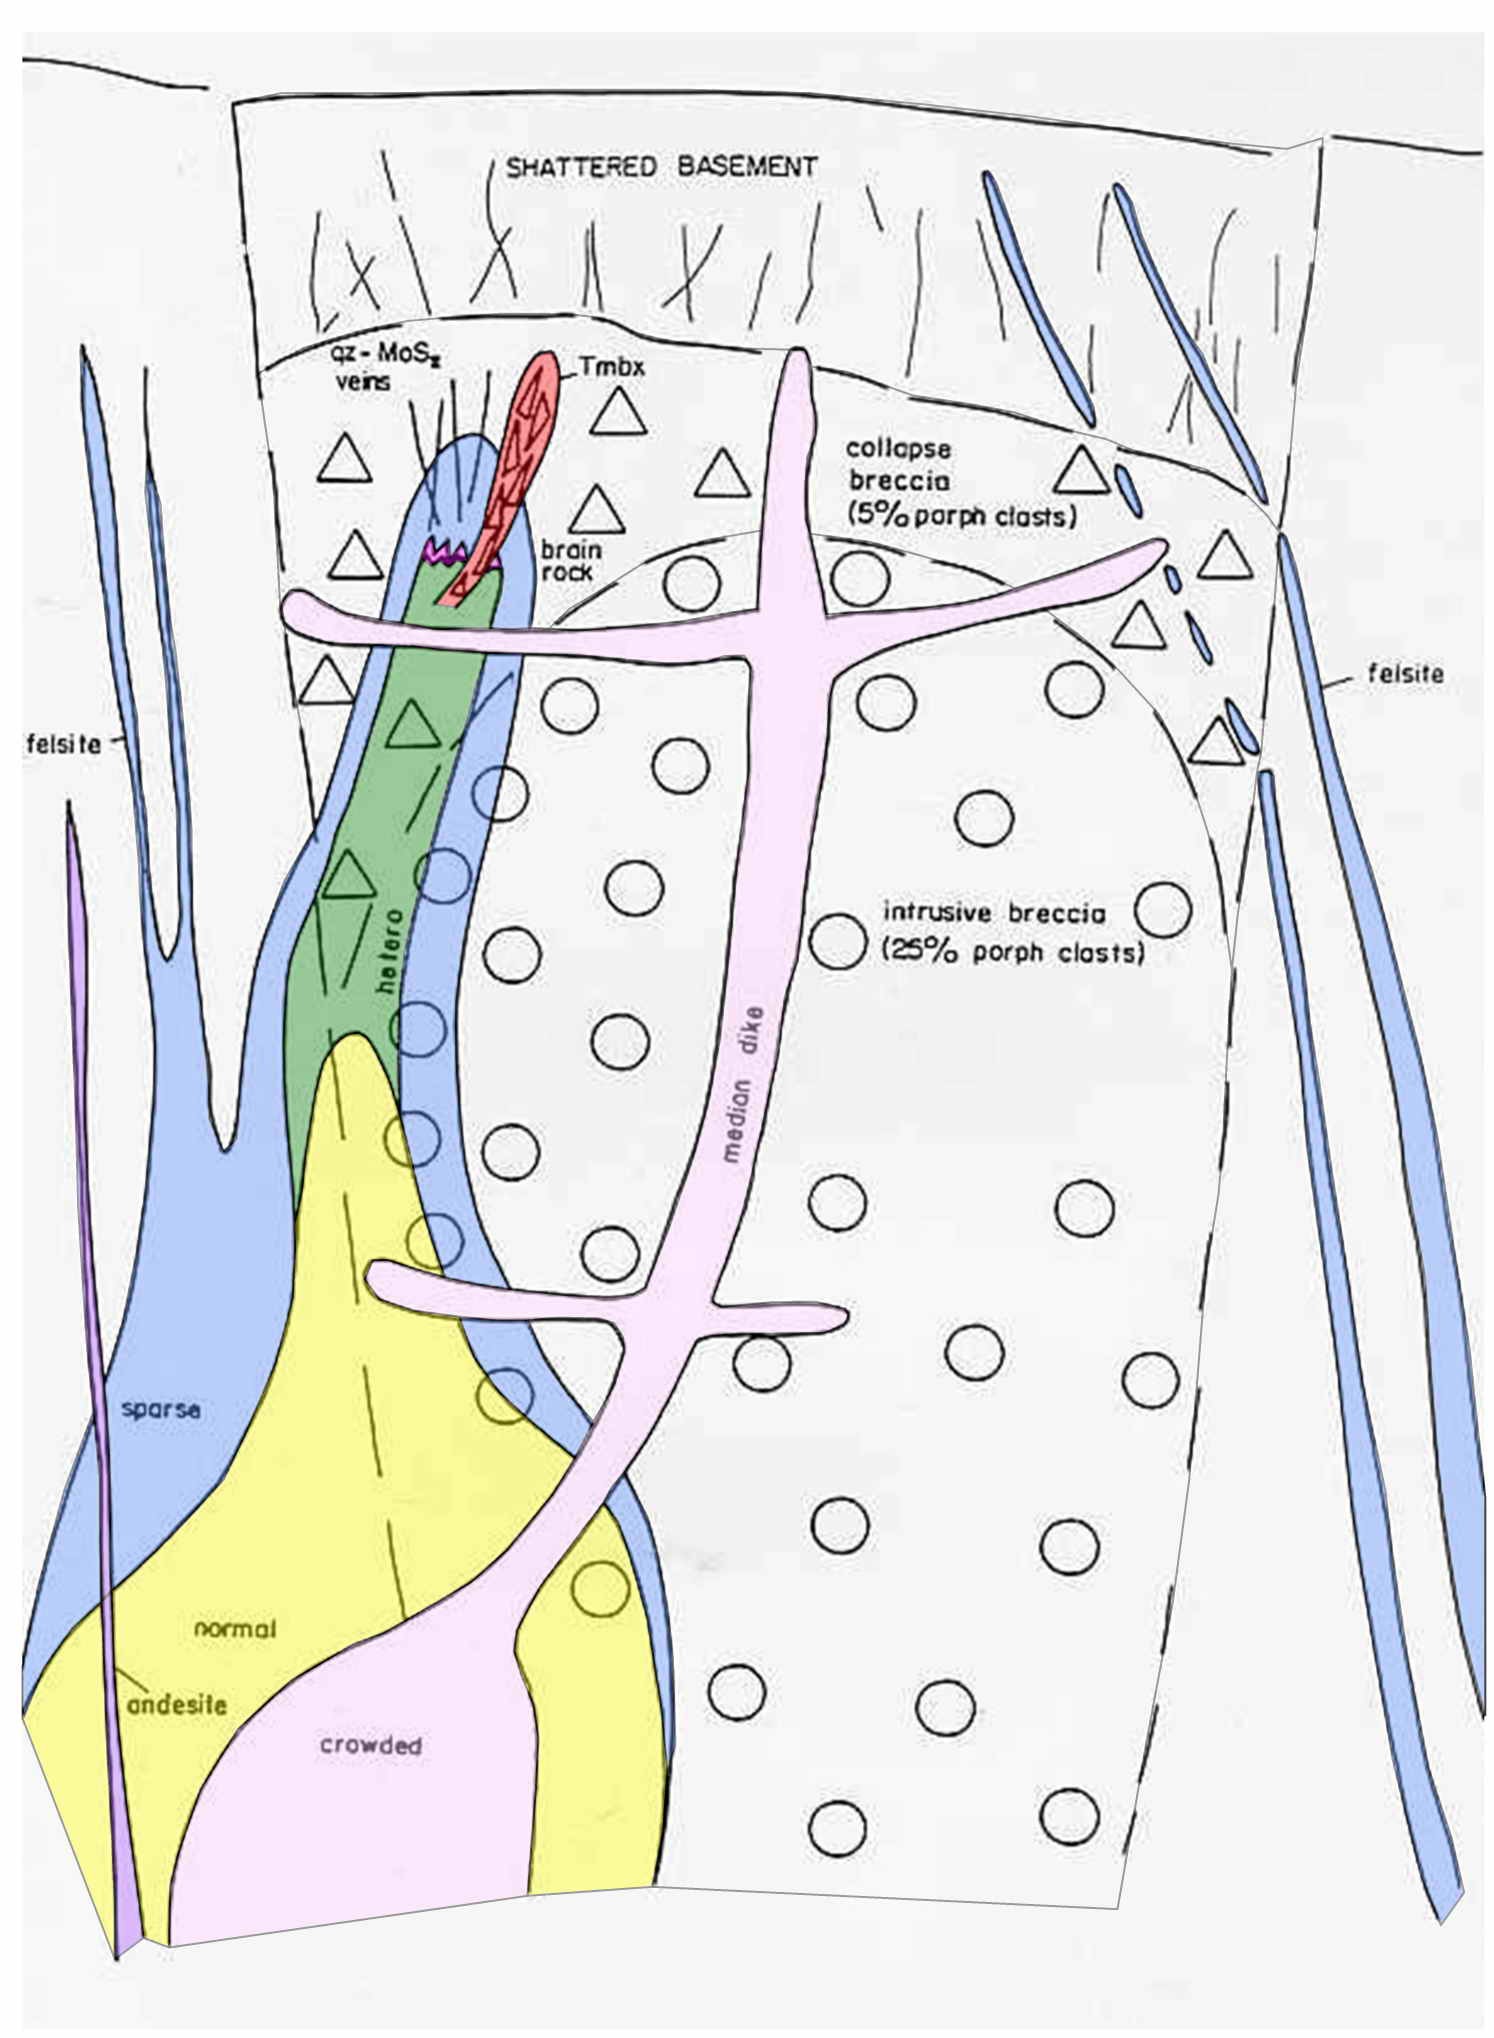 FIGURE 20 : Kidston Gold deposit. Schematic section showing different intrusive phases and breccia types within the pipe. Interpretation based on open cut mapping and deep diamond drill core logs.